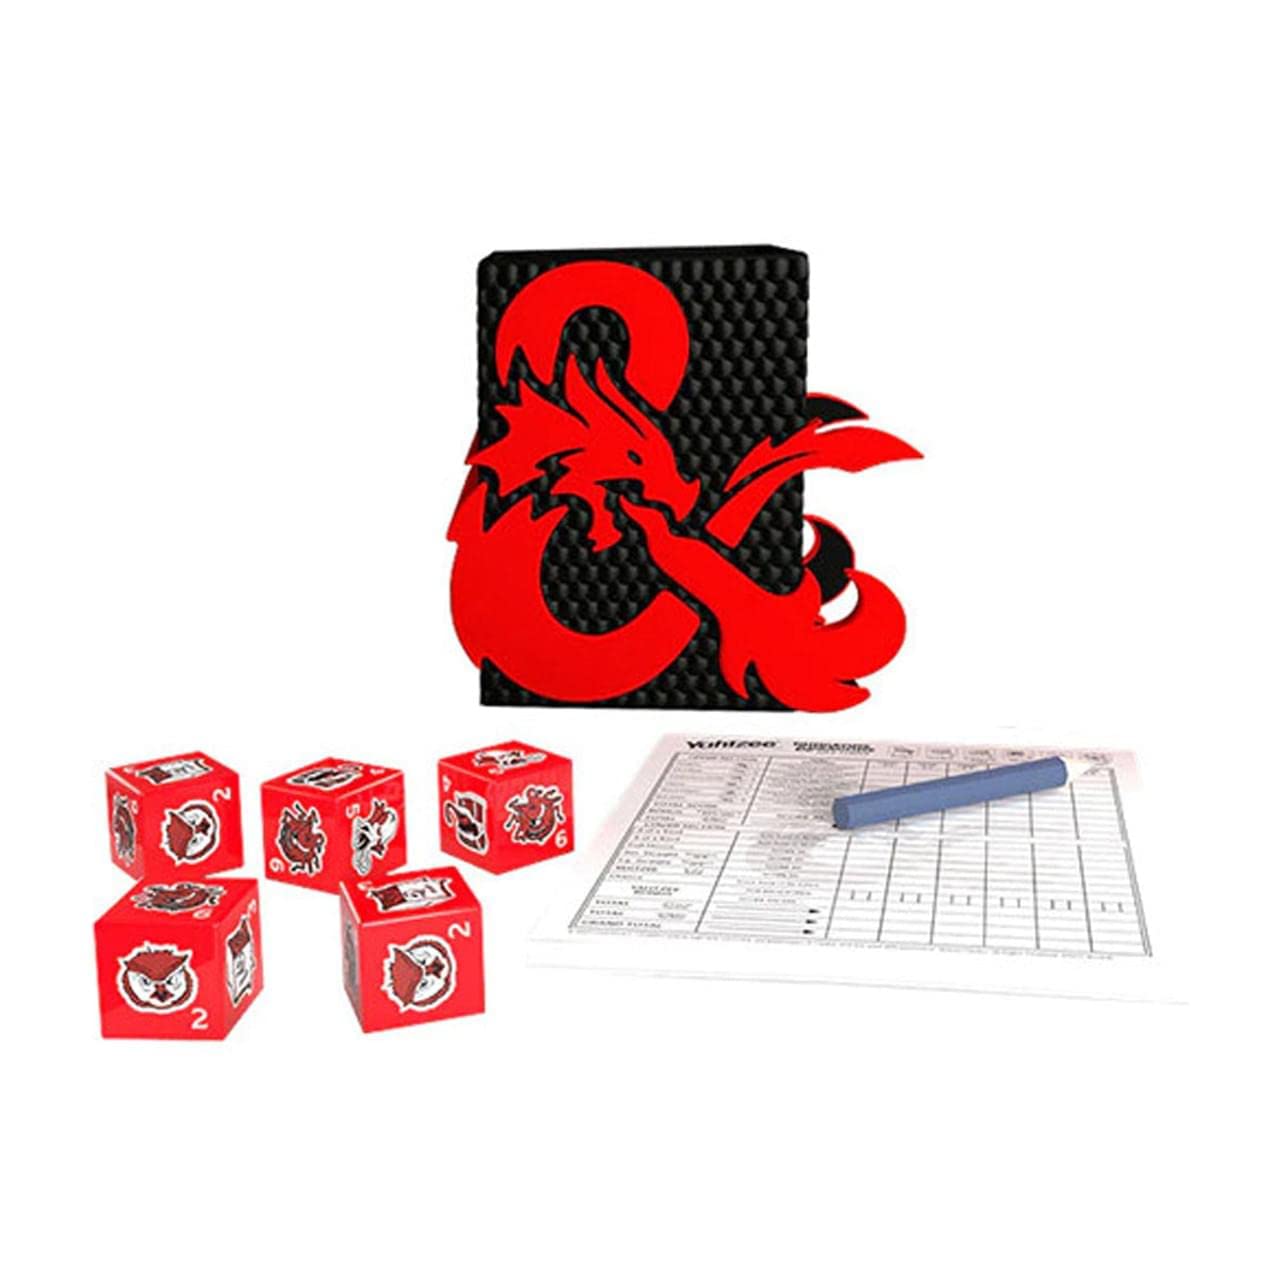 Dungeons & Dragons YAHTZEE- Collectible Dice Tower | Dice Featuring Dragon, Owl Bear, Gelatinous Cube, Mimic, Mind Flayer, and Beholder | Officially-Licensed Dungeons & Dragons Game & Merchandise